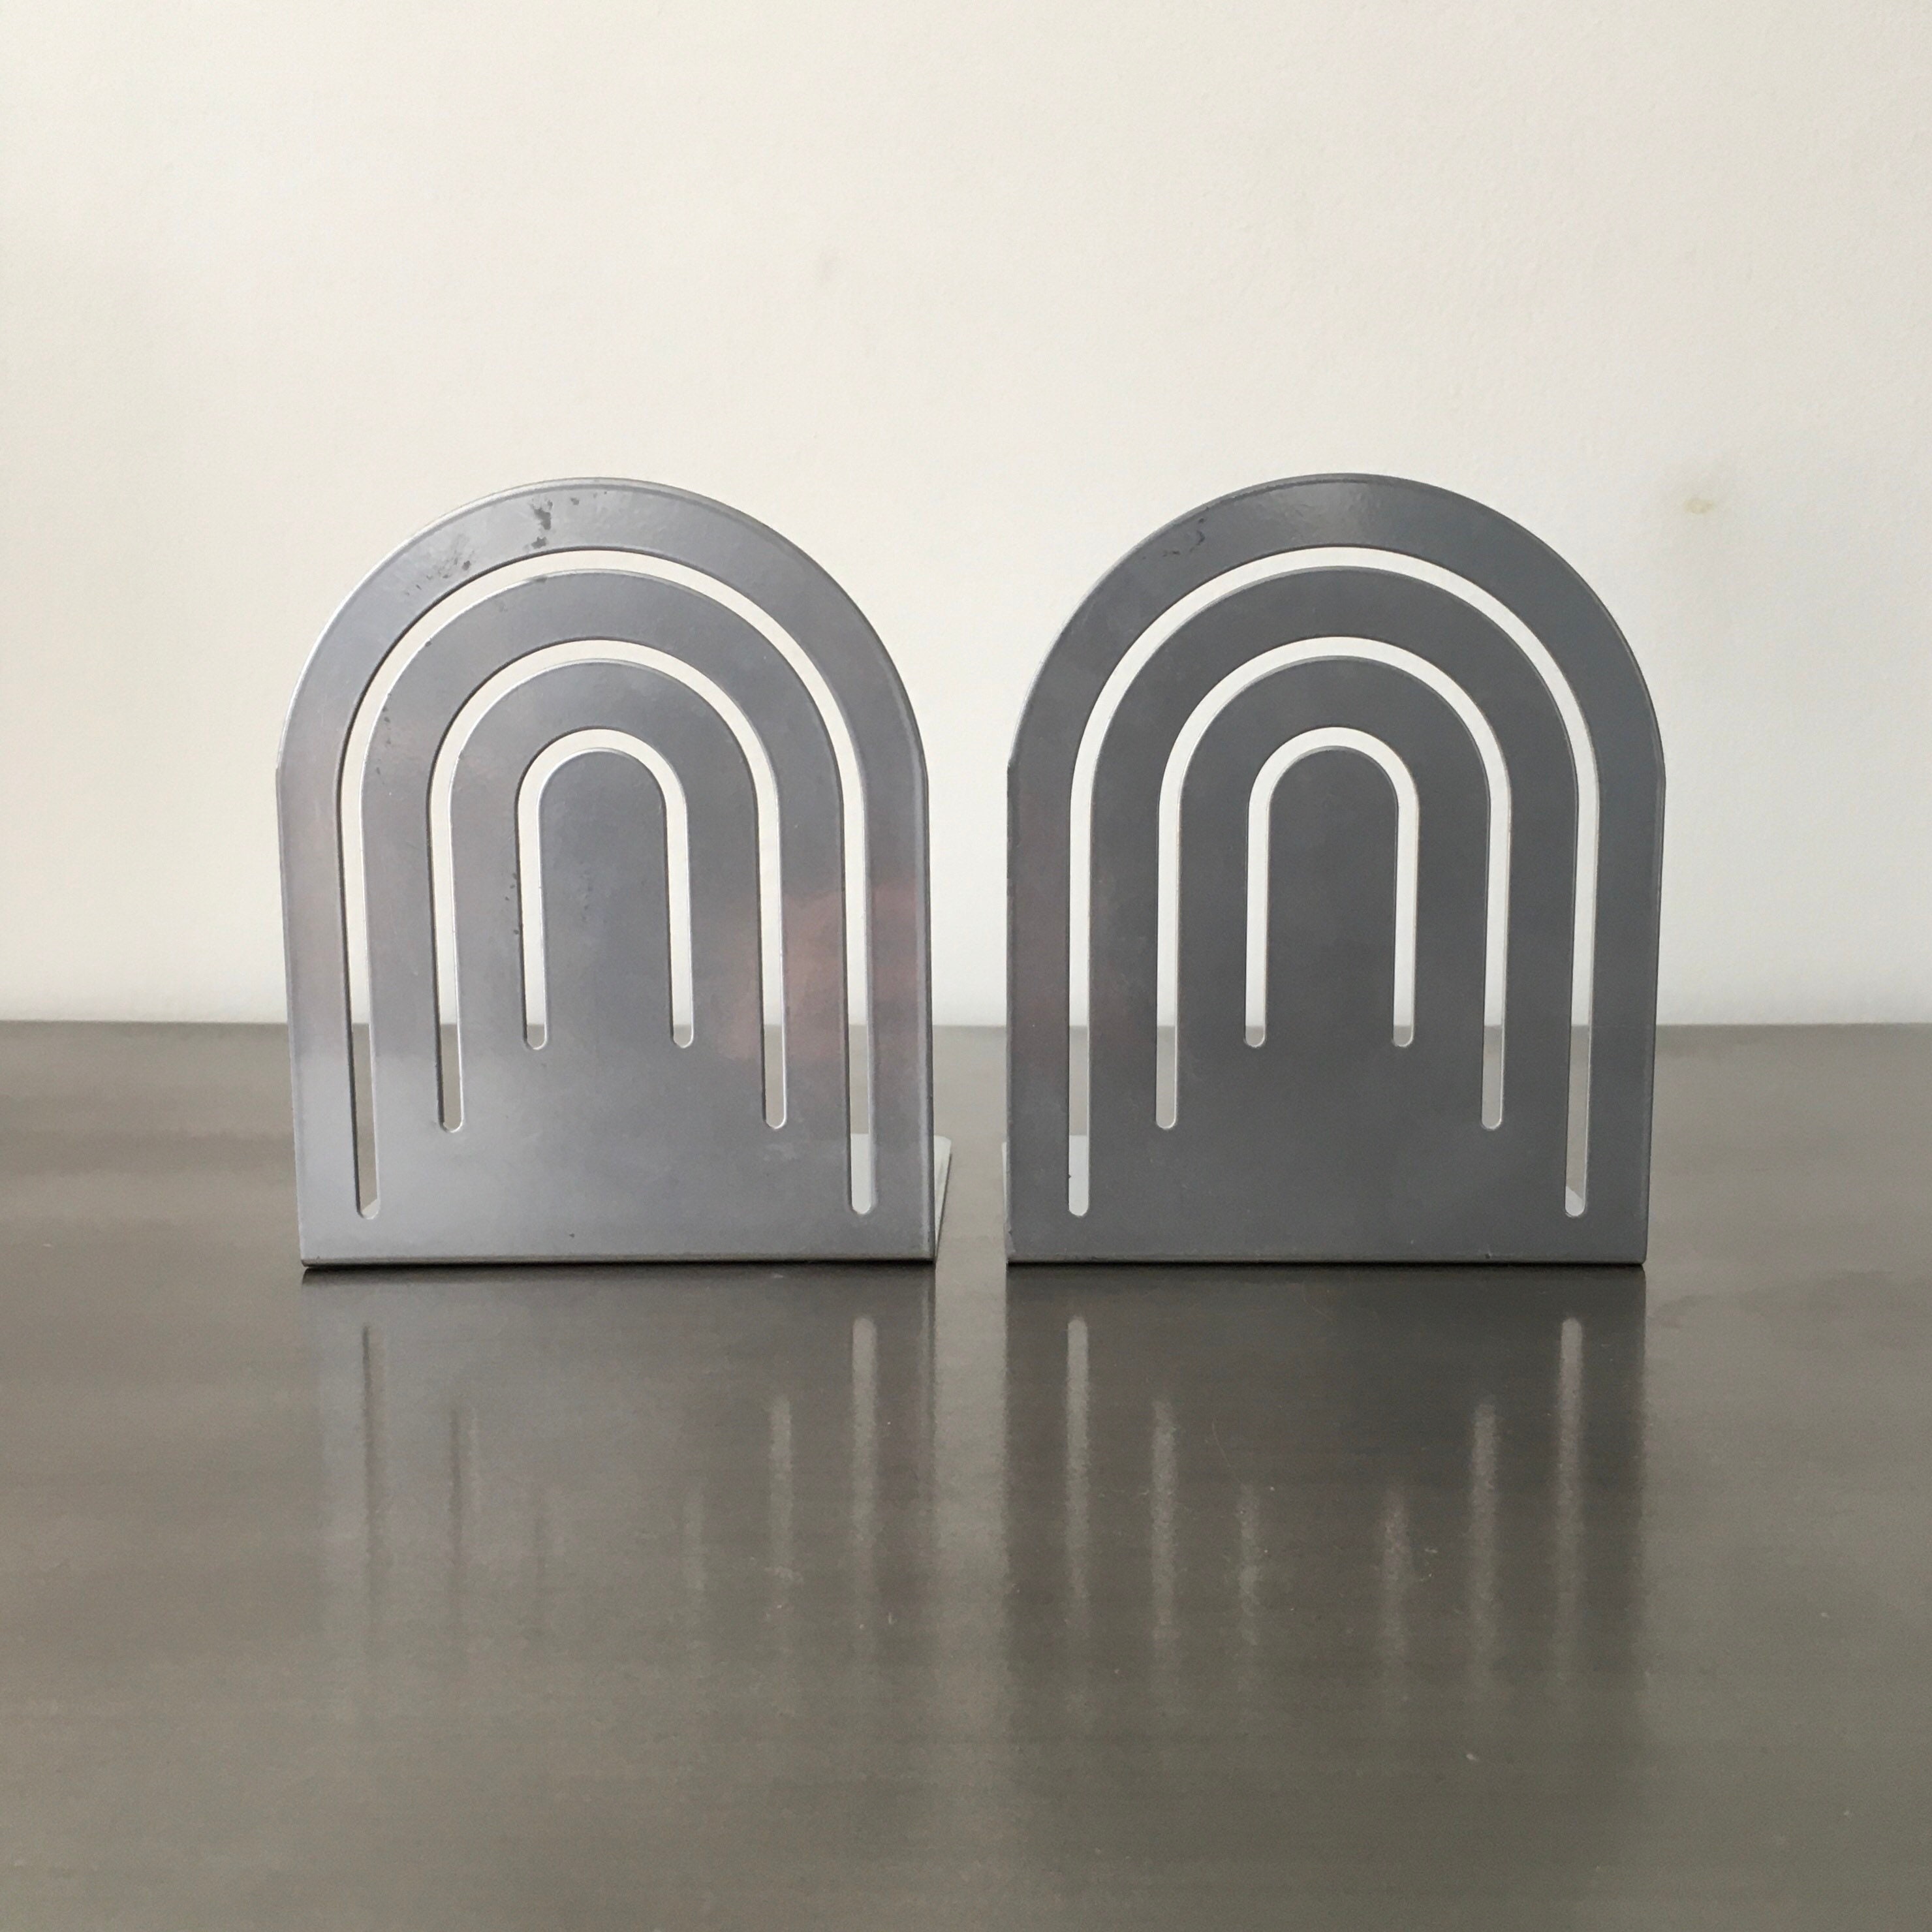 New Contemporary Mat Black Arched Simple Metal Bookends Book Ends Pair 7.5" 